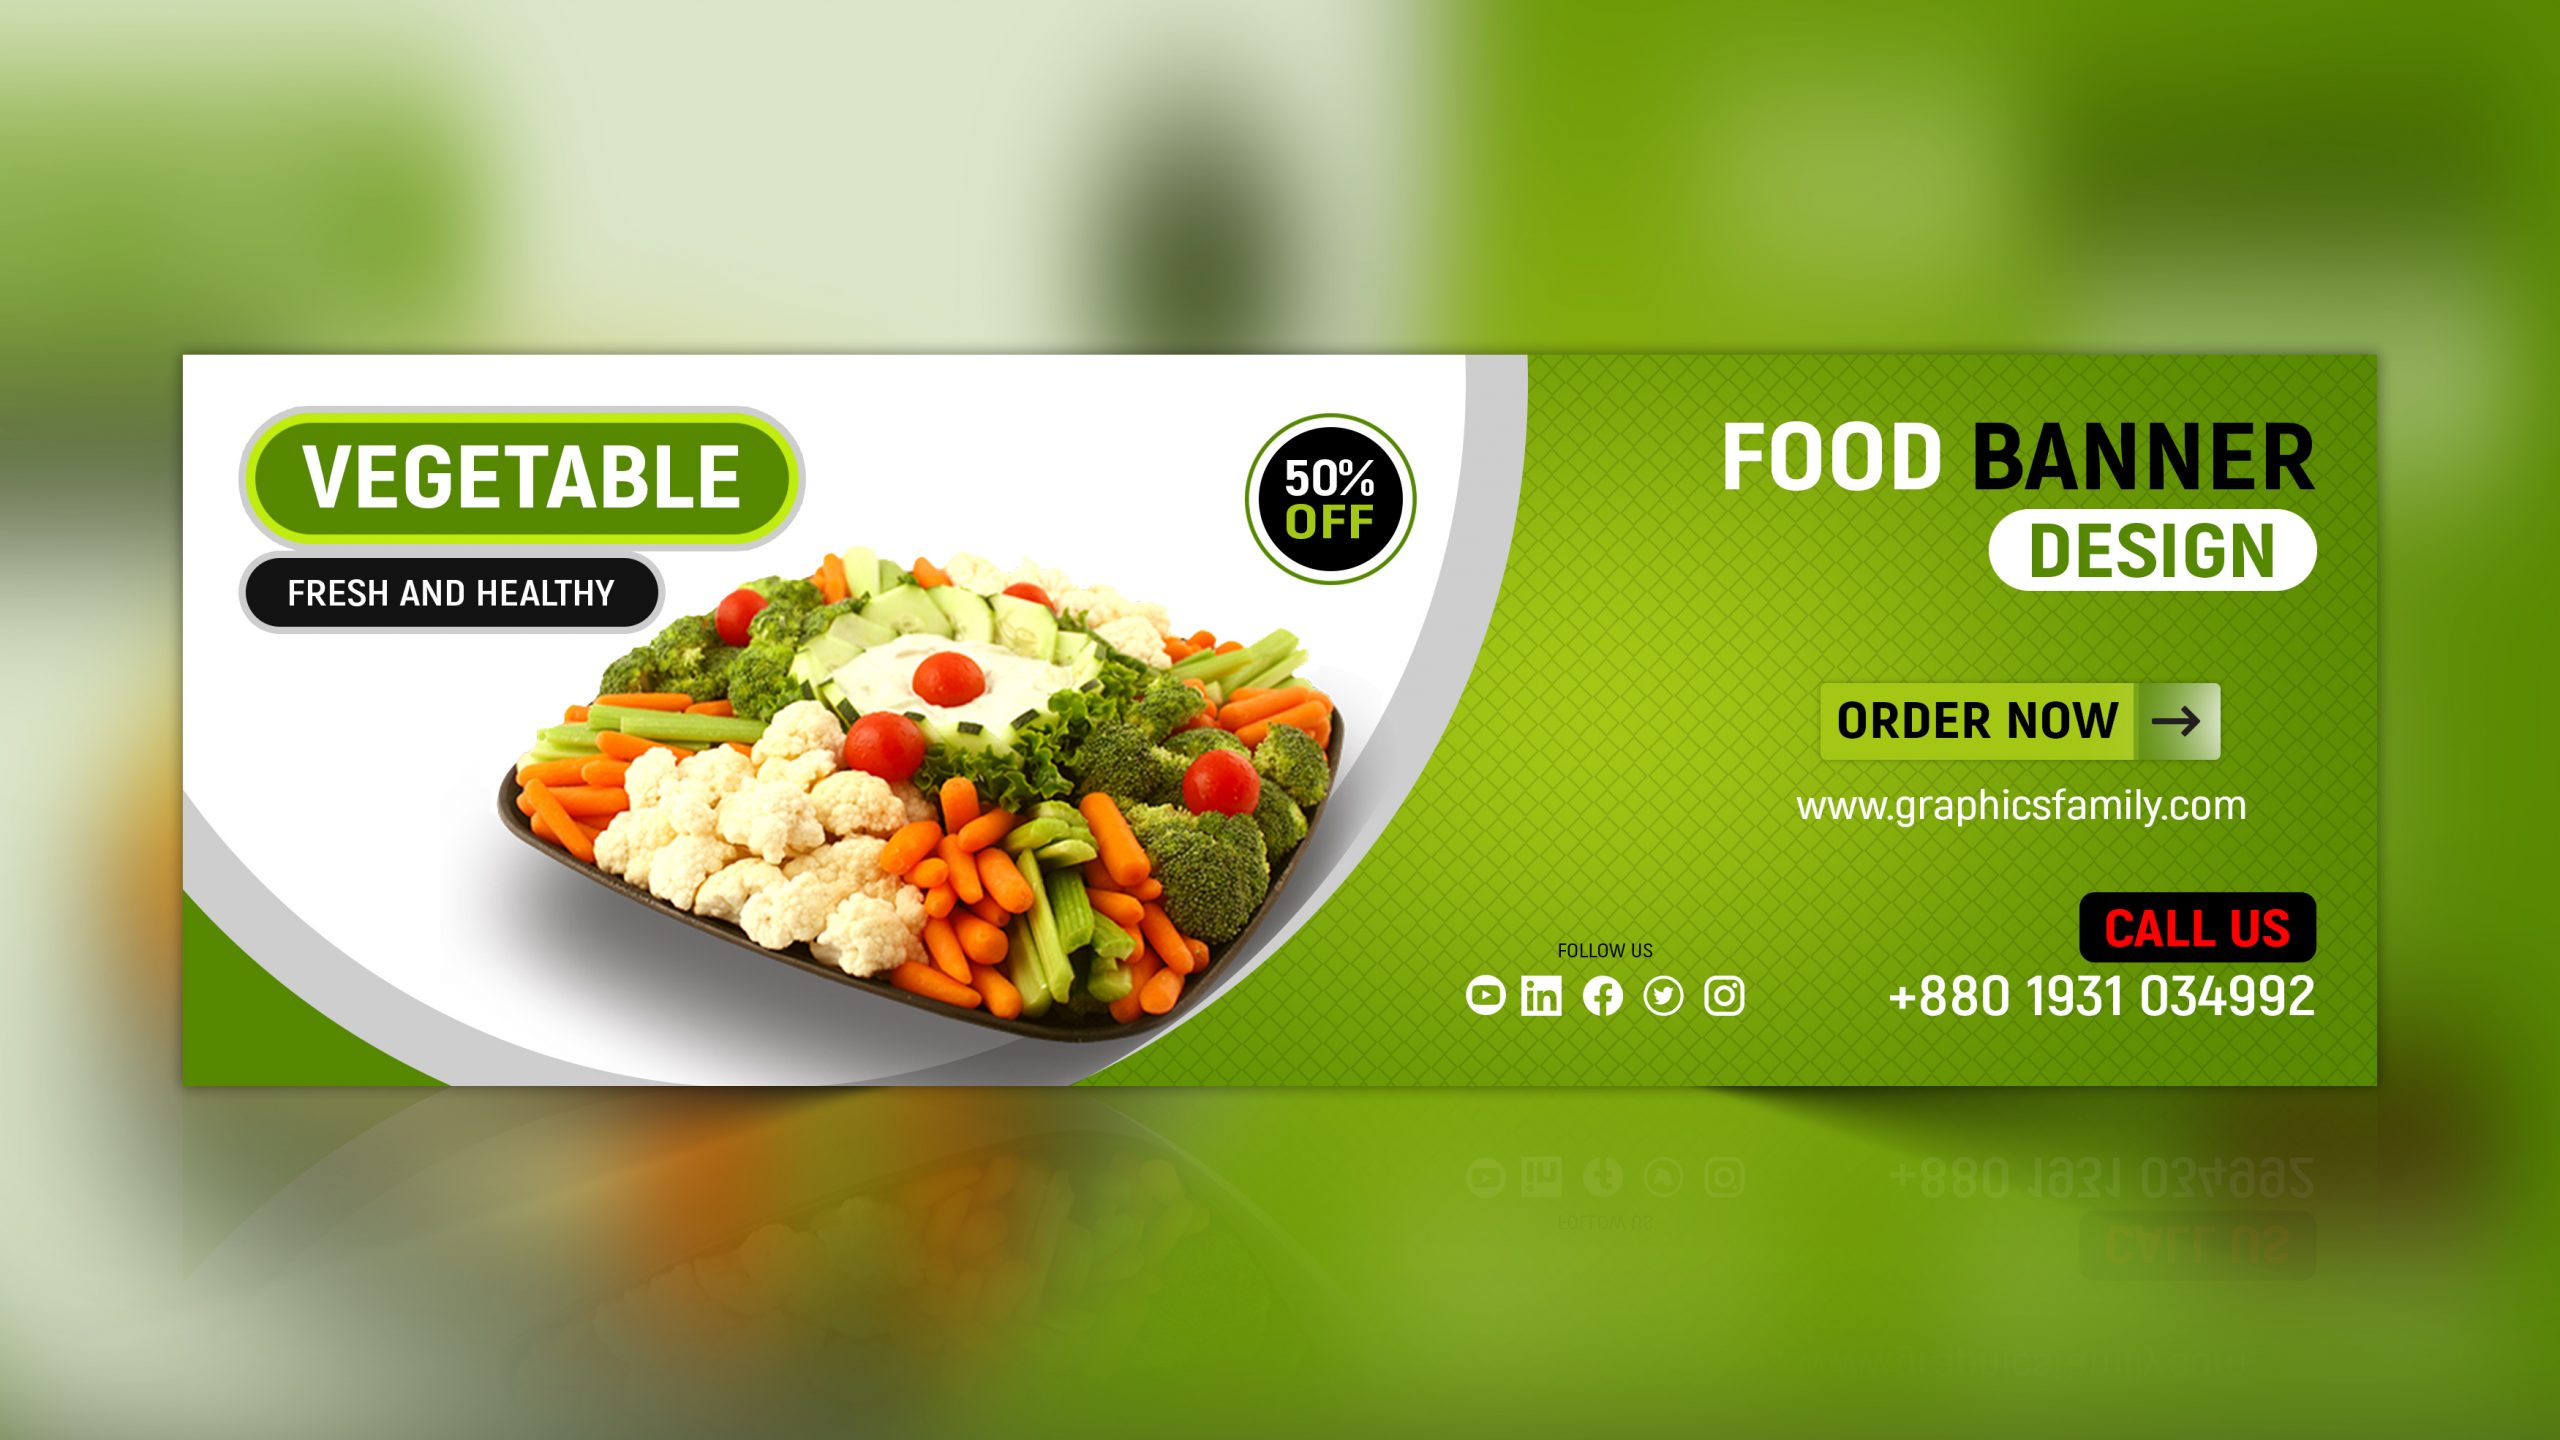 Fresh and healthy vegetables banner design template